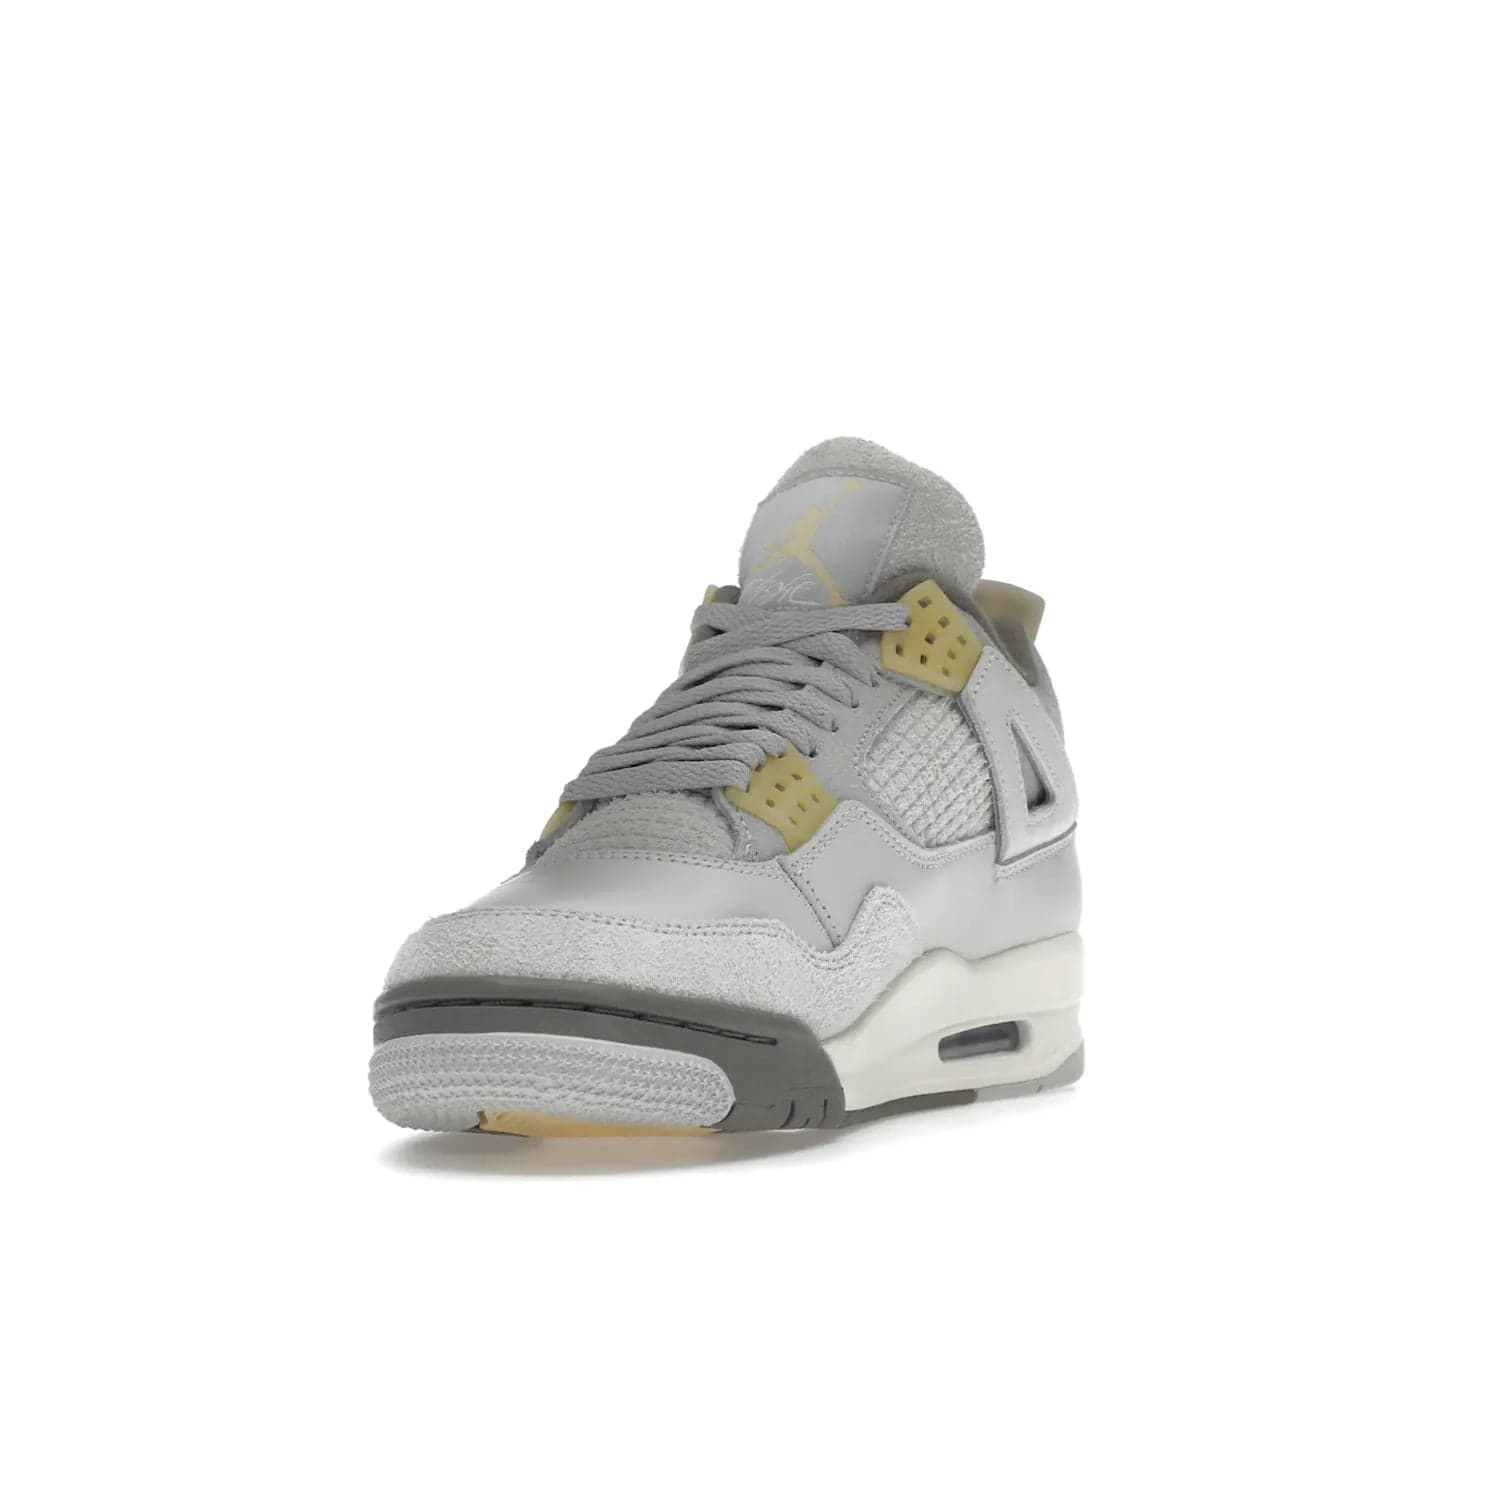 Jordan 4 Retro SE Craft Photon Dust - Image 13 - Only at www.BallersClubKickz.com - Upgrade your shoe collection with the Air Jordan 4 Retro SE Craft Photon Dust. This luxurious sneaker features a combination of suede and leather with unique grey tones like Photon Dust, Pale Vanilla, Off White, Grey Fog, Flat Pewter, and Sail. Available February 11, 2023.